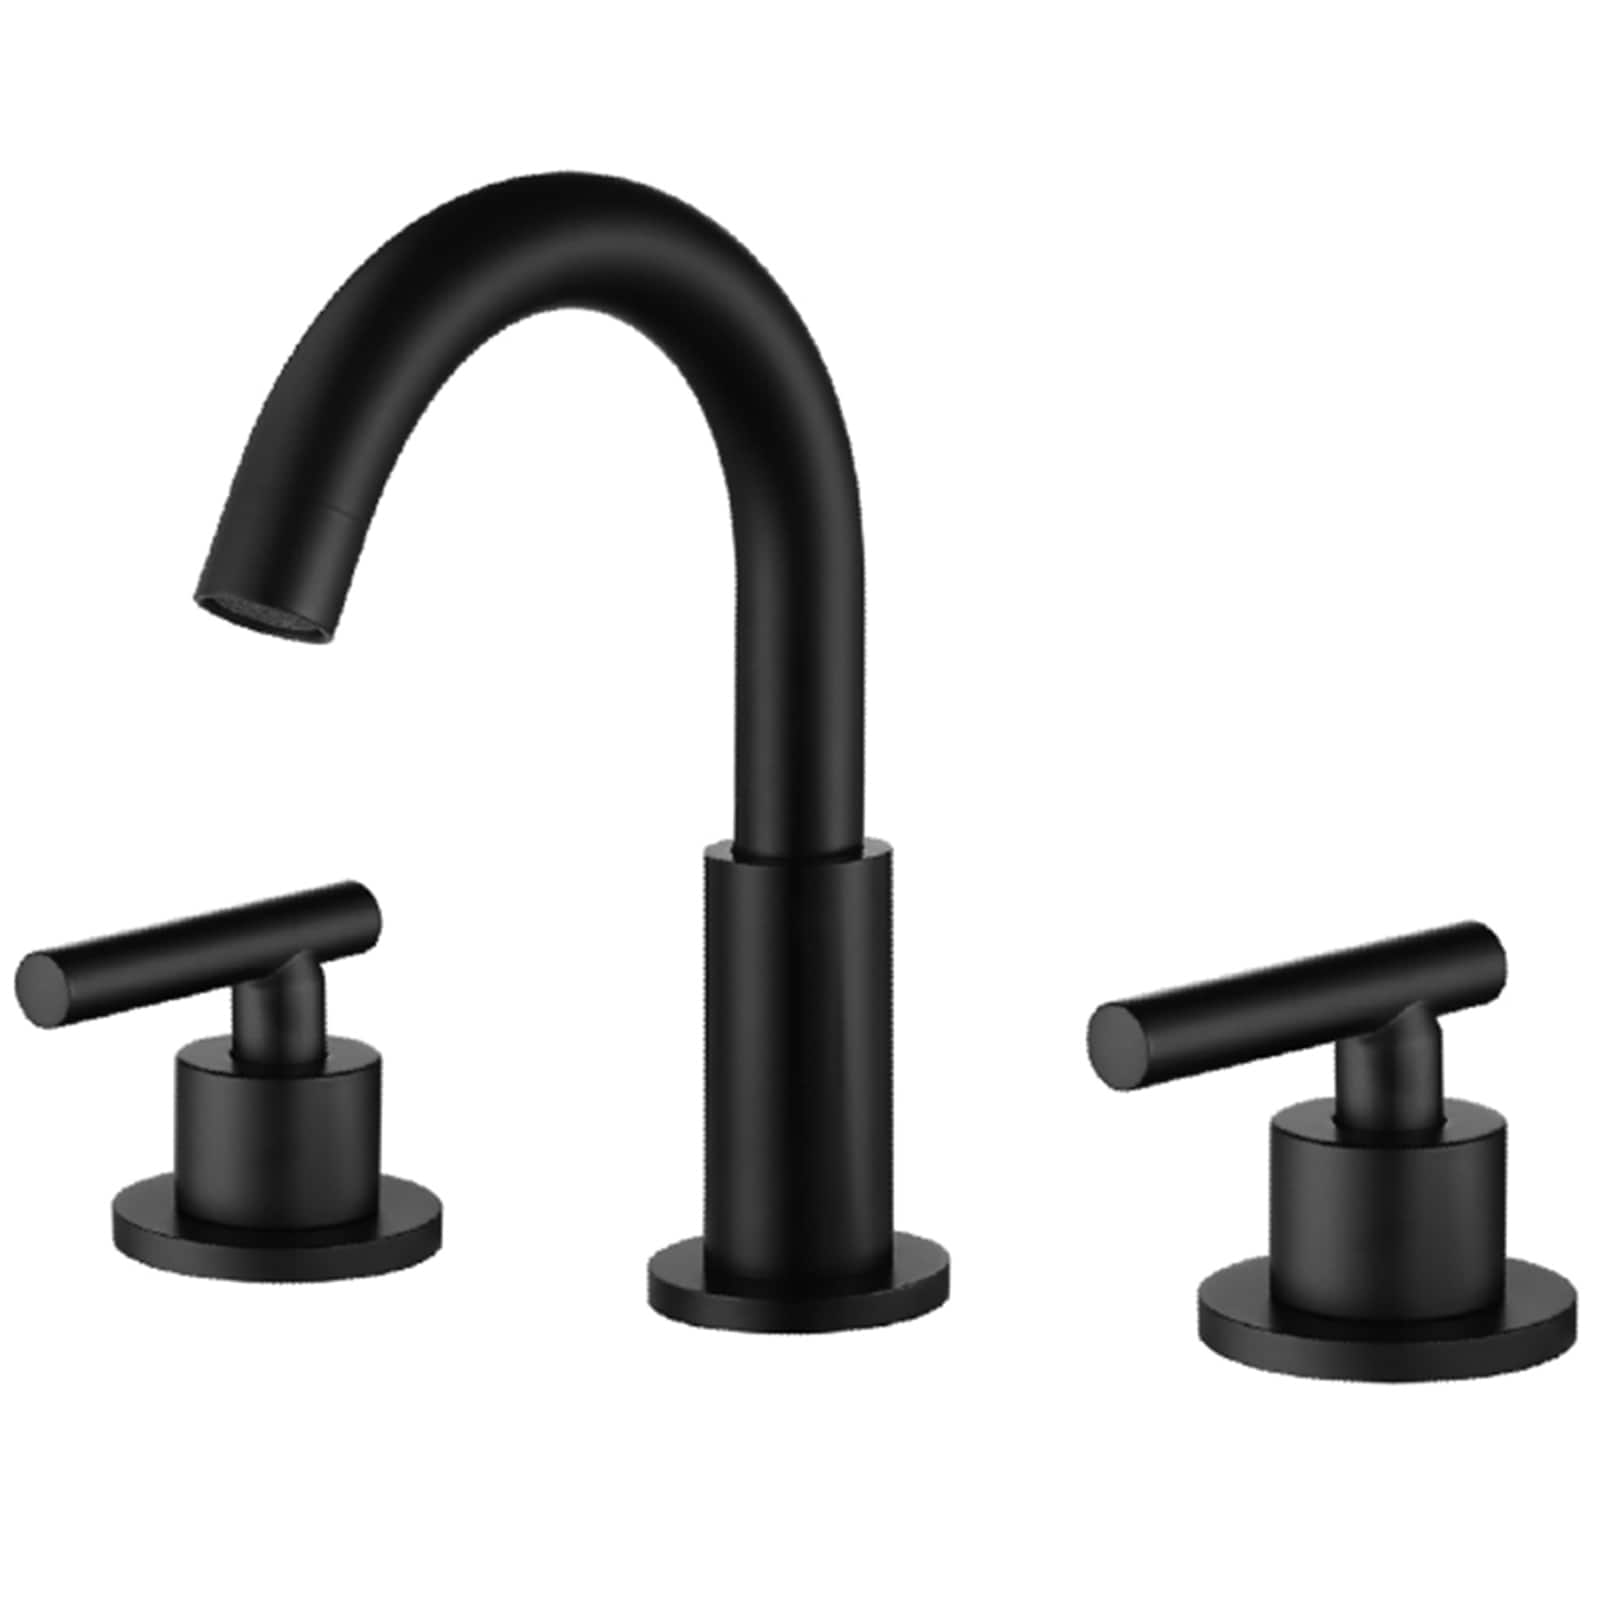 Flynama 8 in, Widespread Double Handle Bathroom Sink Faucet with